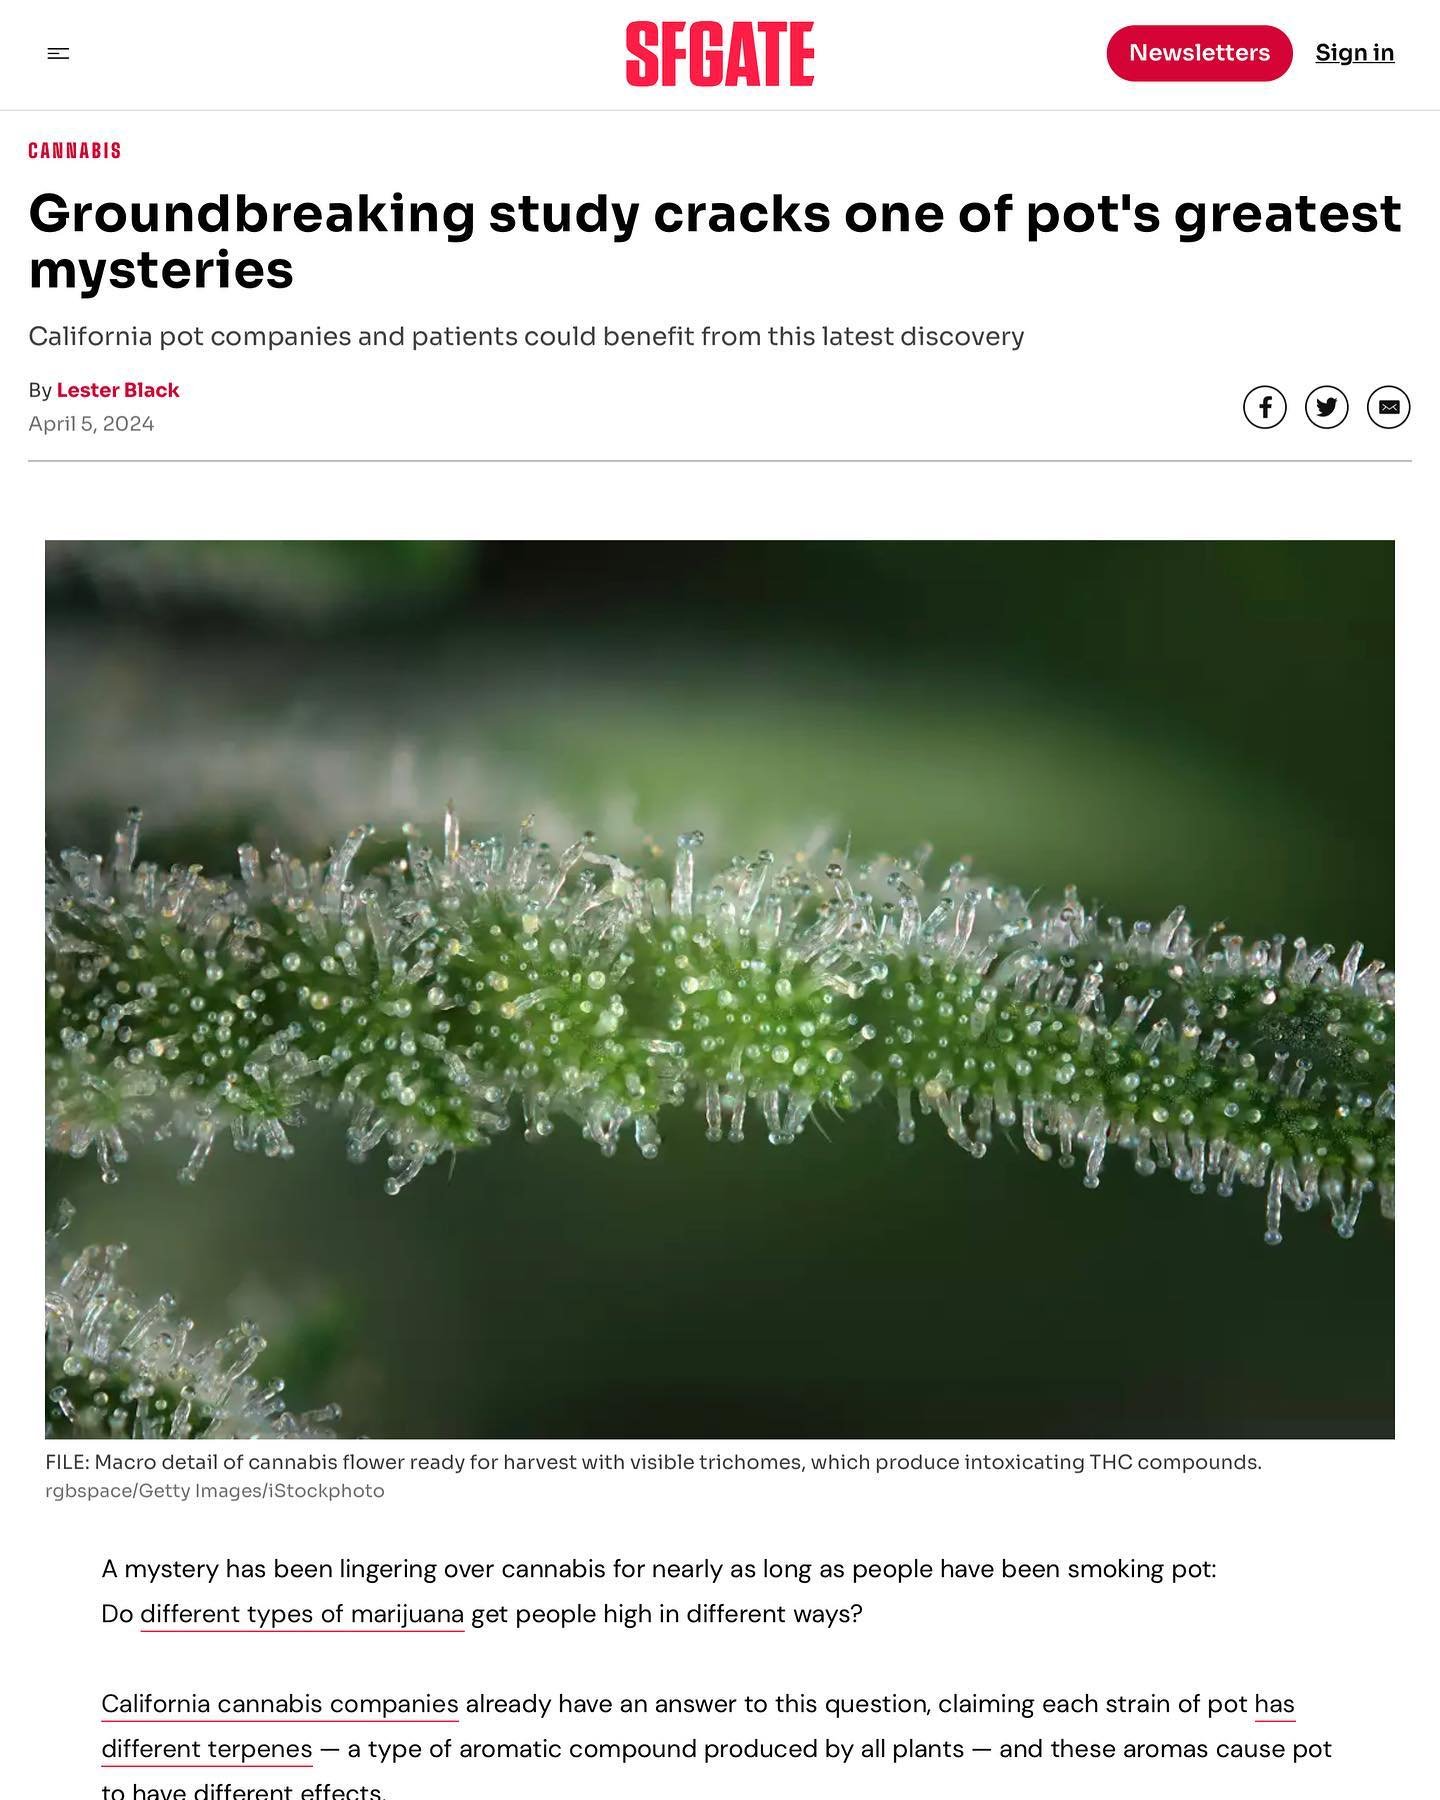 With 100&rsquo;s of chemical compounds in this plant, we need to stop focusing in on only one- THC!
Check out this latest article by @leddder for SF Gate.
~
For us, we thrilled to see the work being done in the science and medical community, to furth